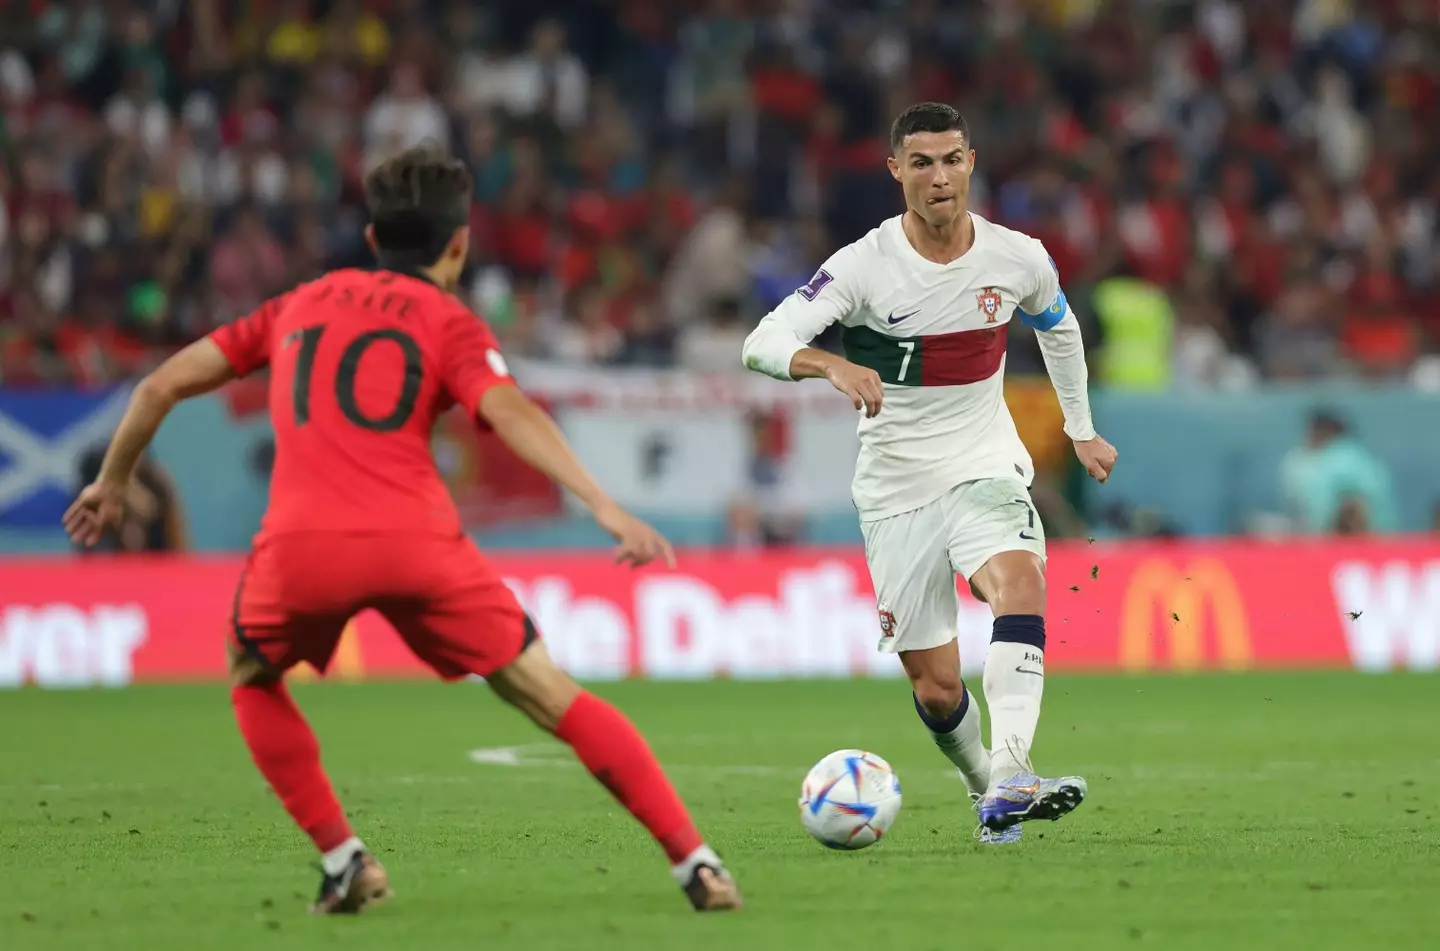 Former Manchester United star Cristiano Ronaldo is hoping Portugal can lift the World Cup in Qatar.